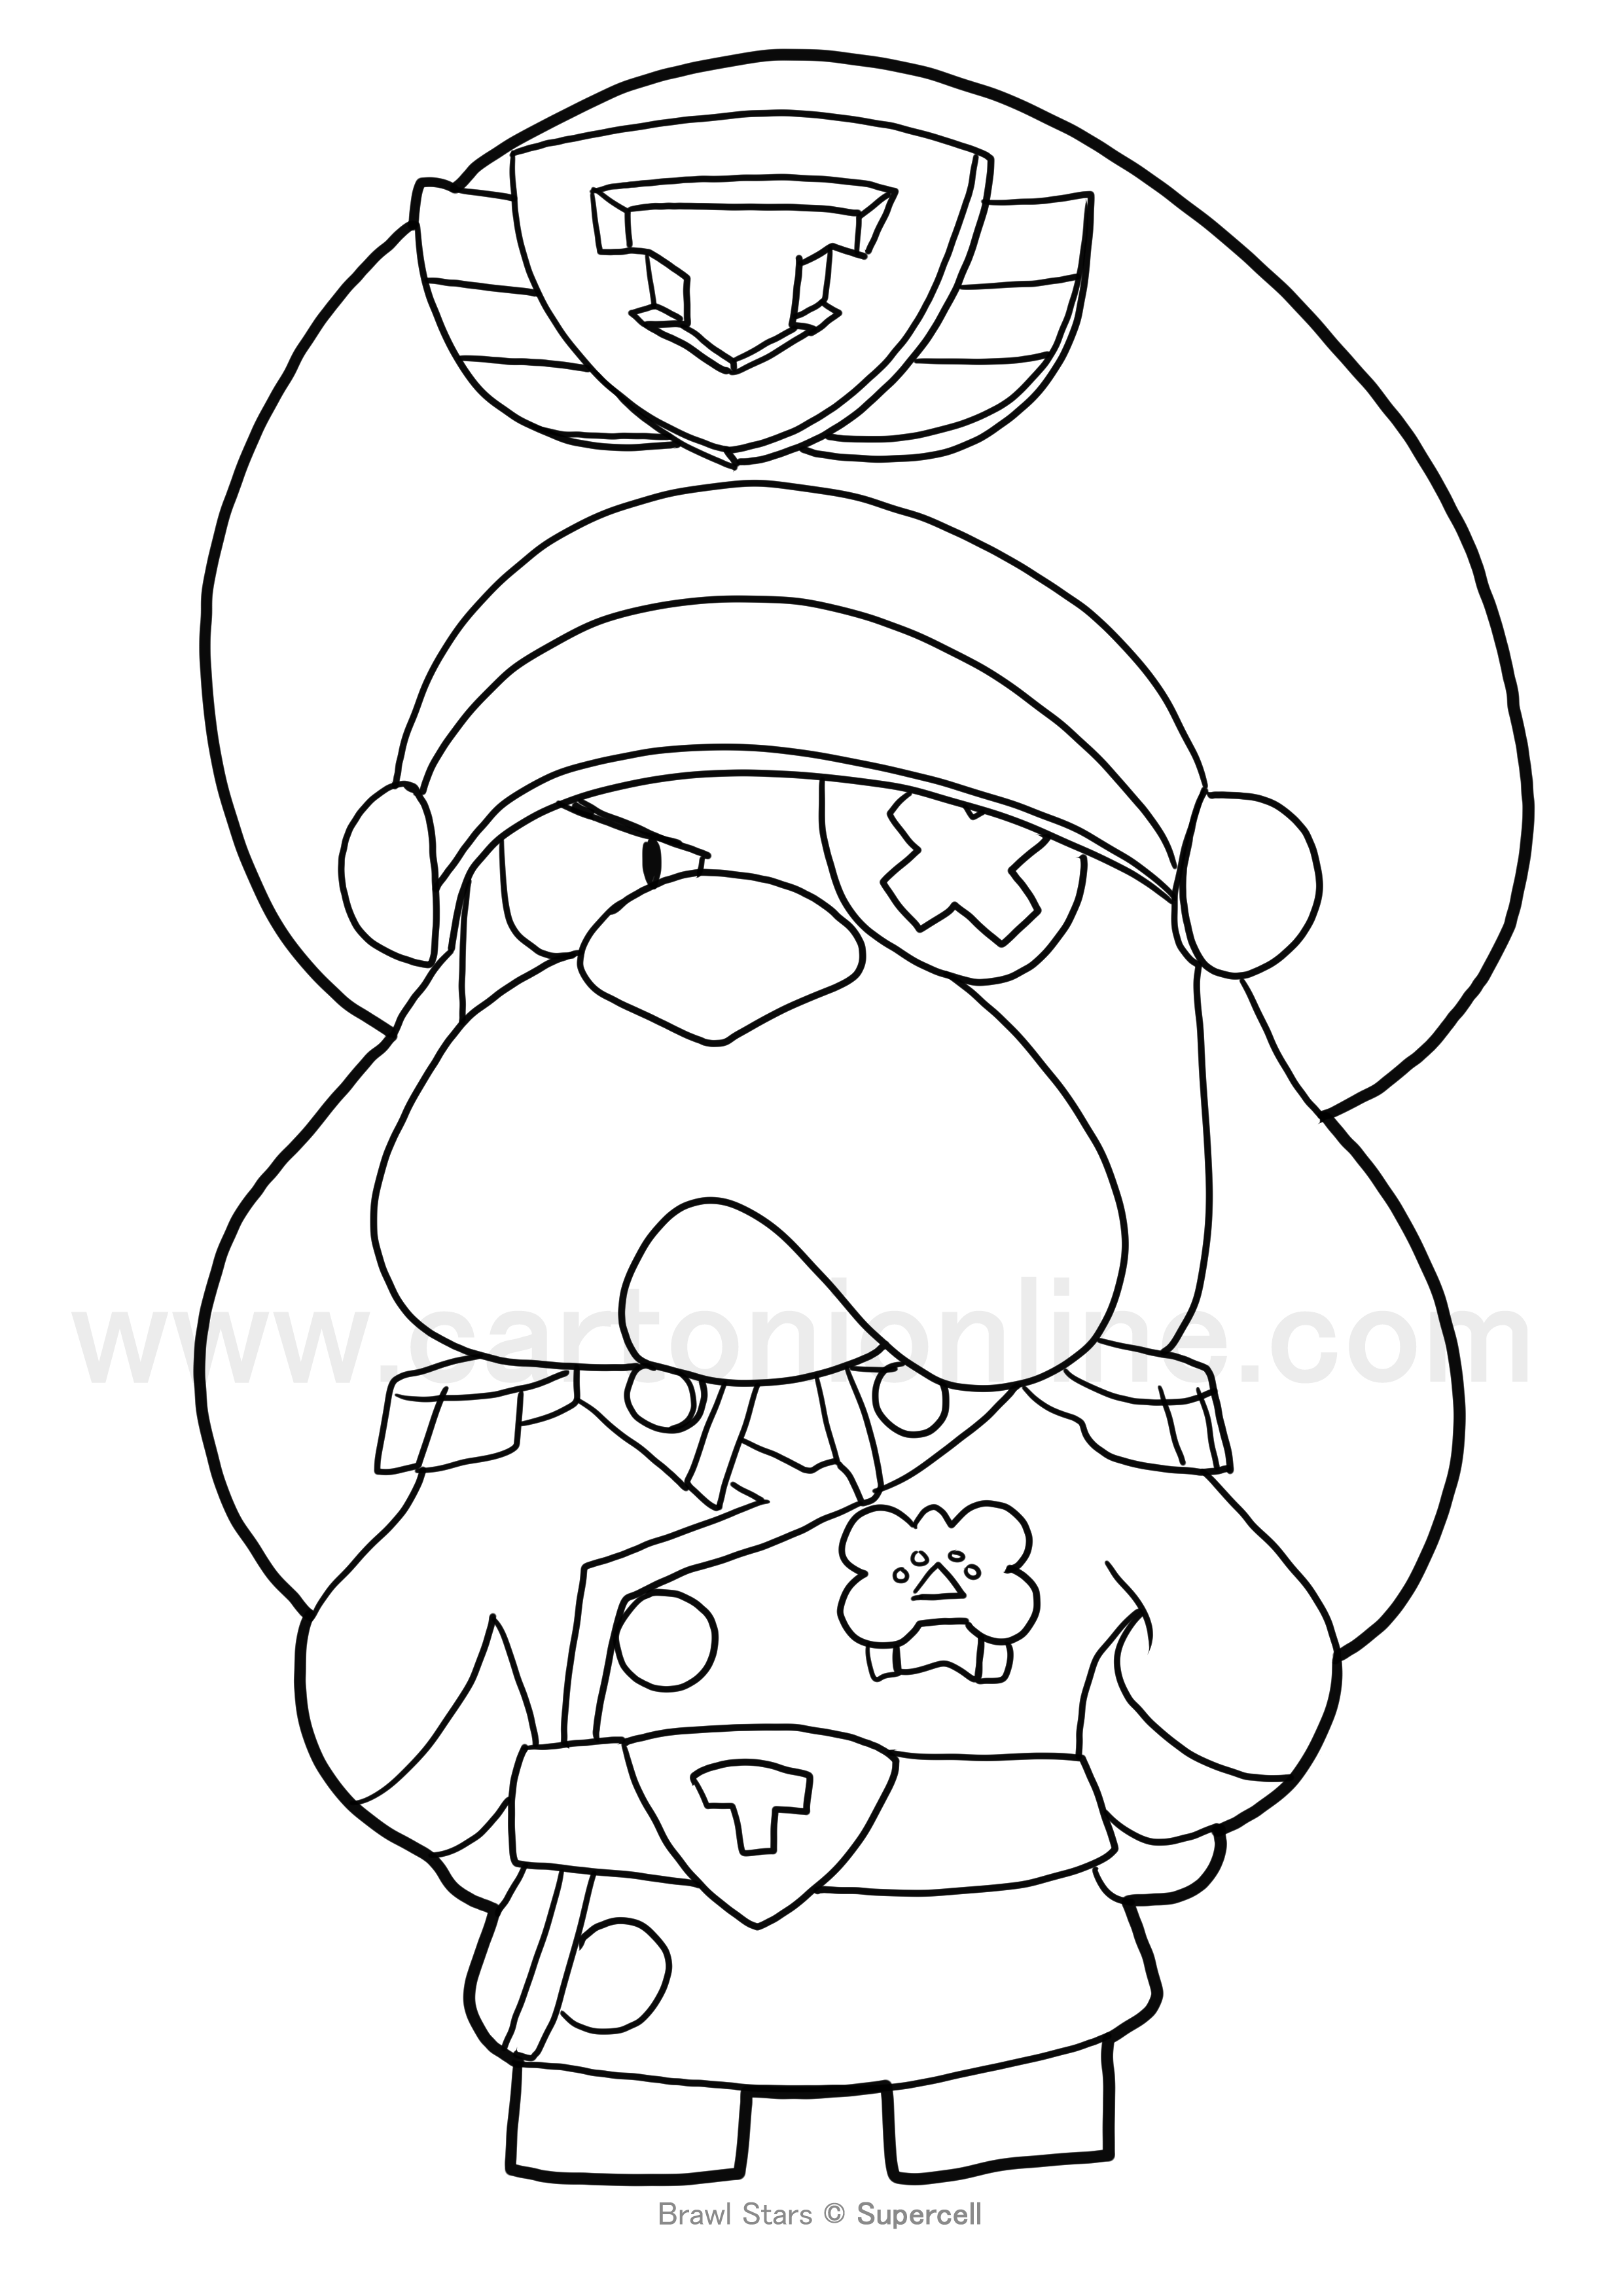 Colonel Ruffs from Brawl Stars coloring page to print and coloring